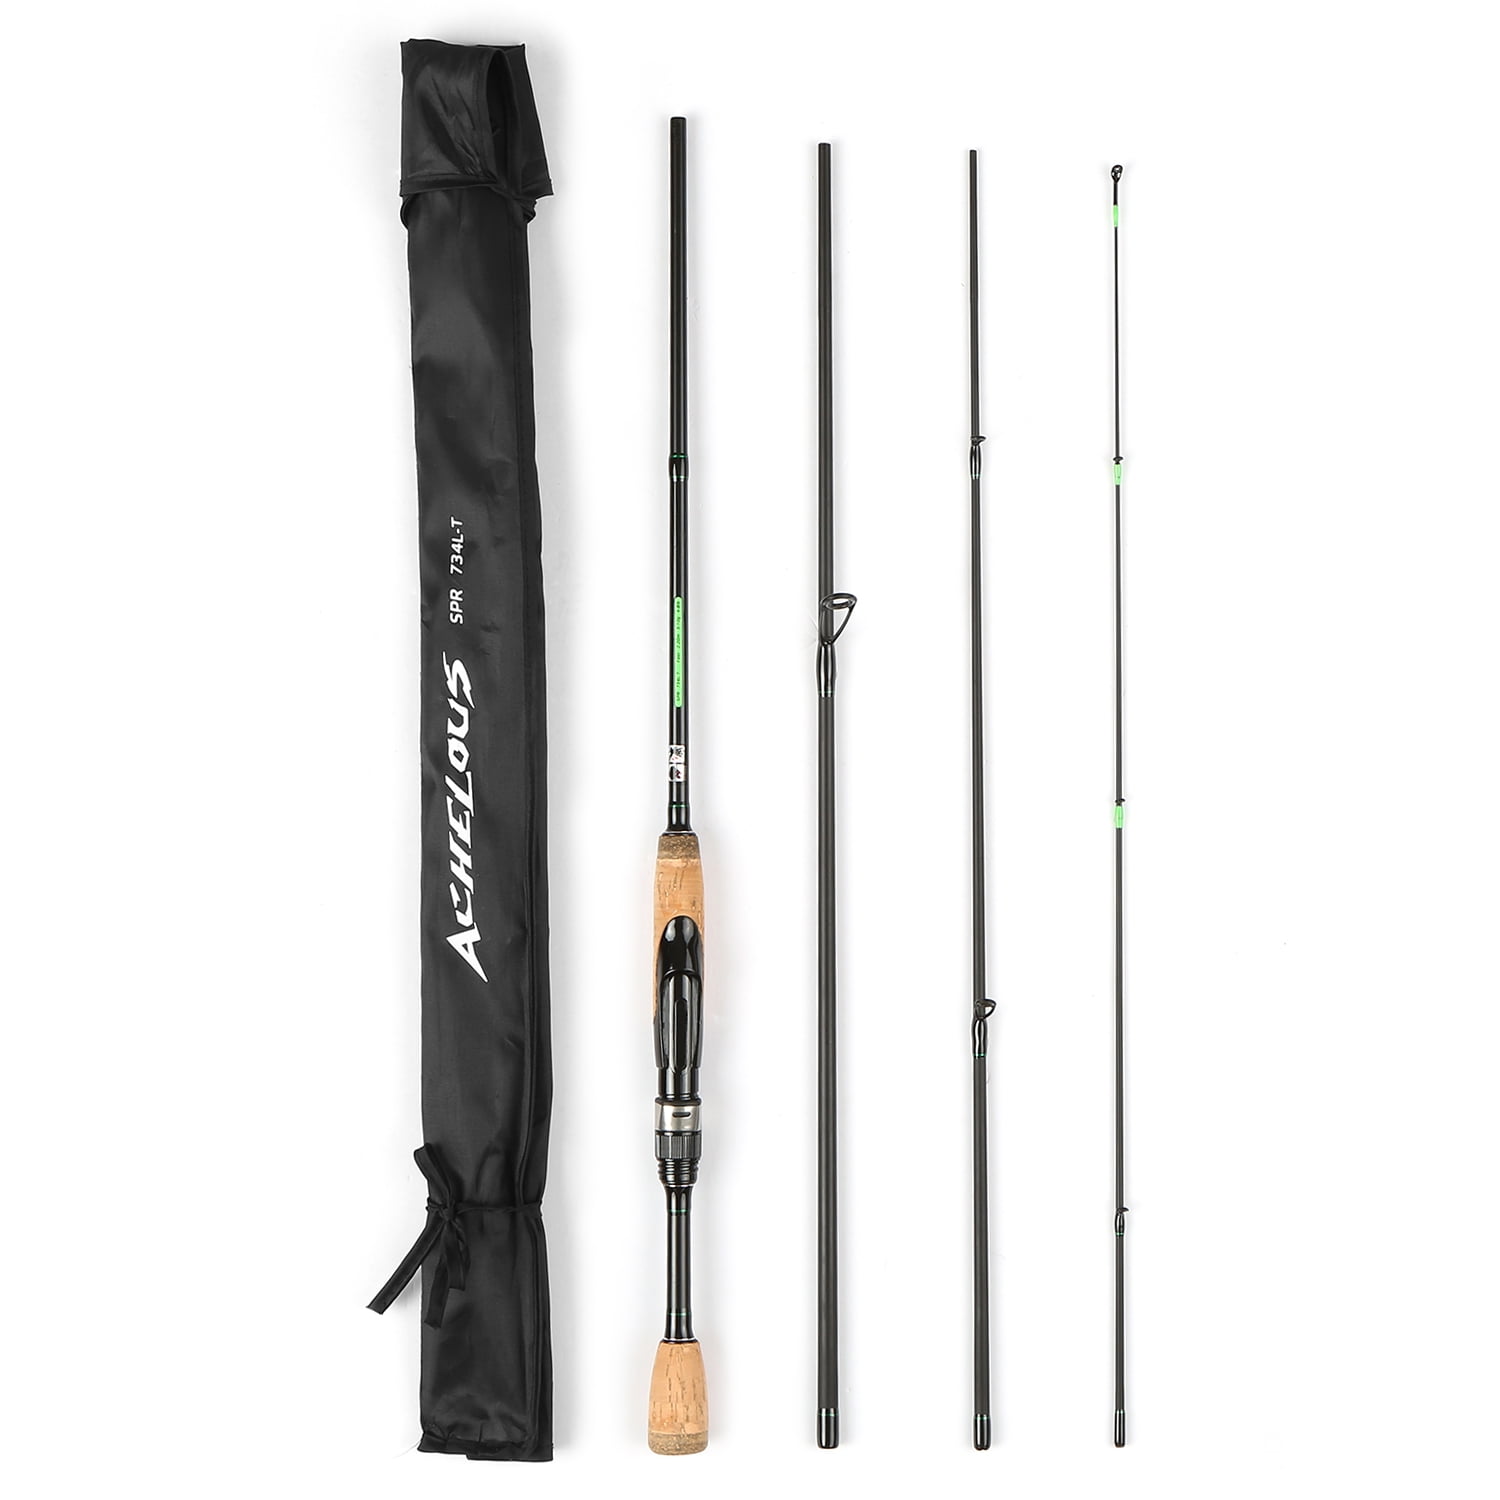 Portable Travel Spinning Fishing Rod 6.8FT Lightweight Carbon Fiber 4  Pieces Fishing Pole